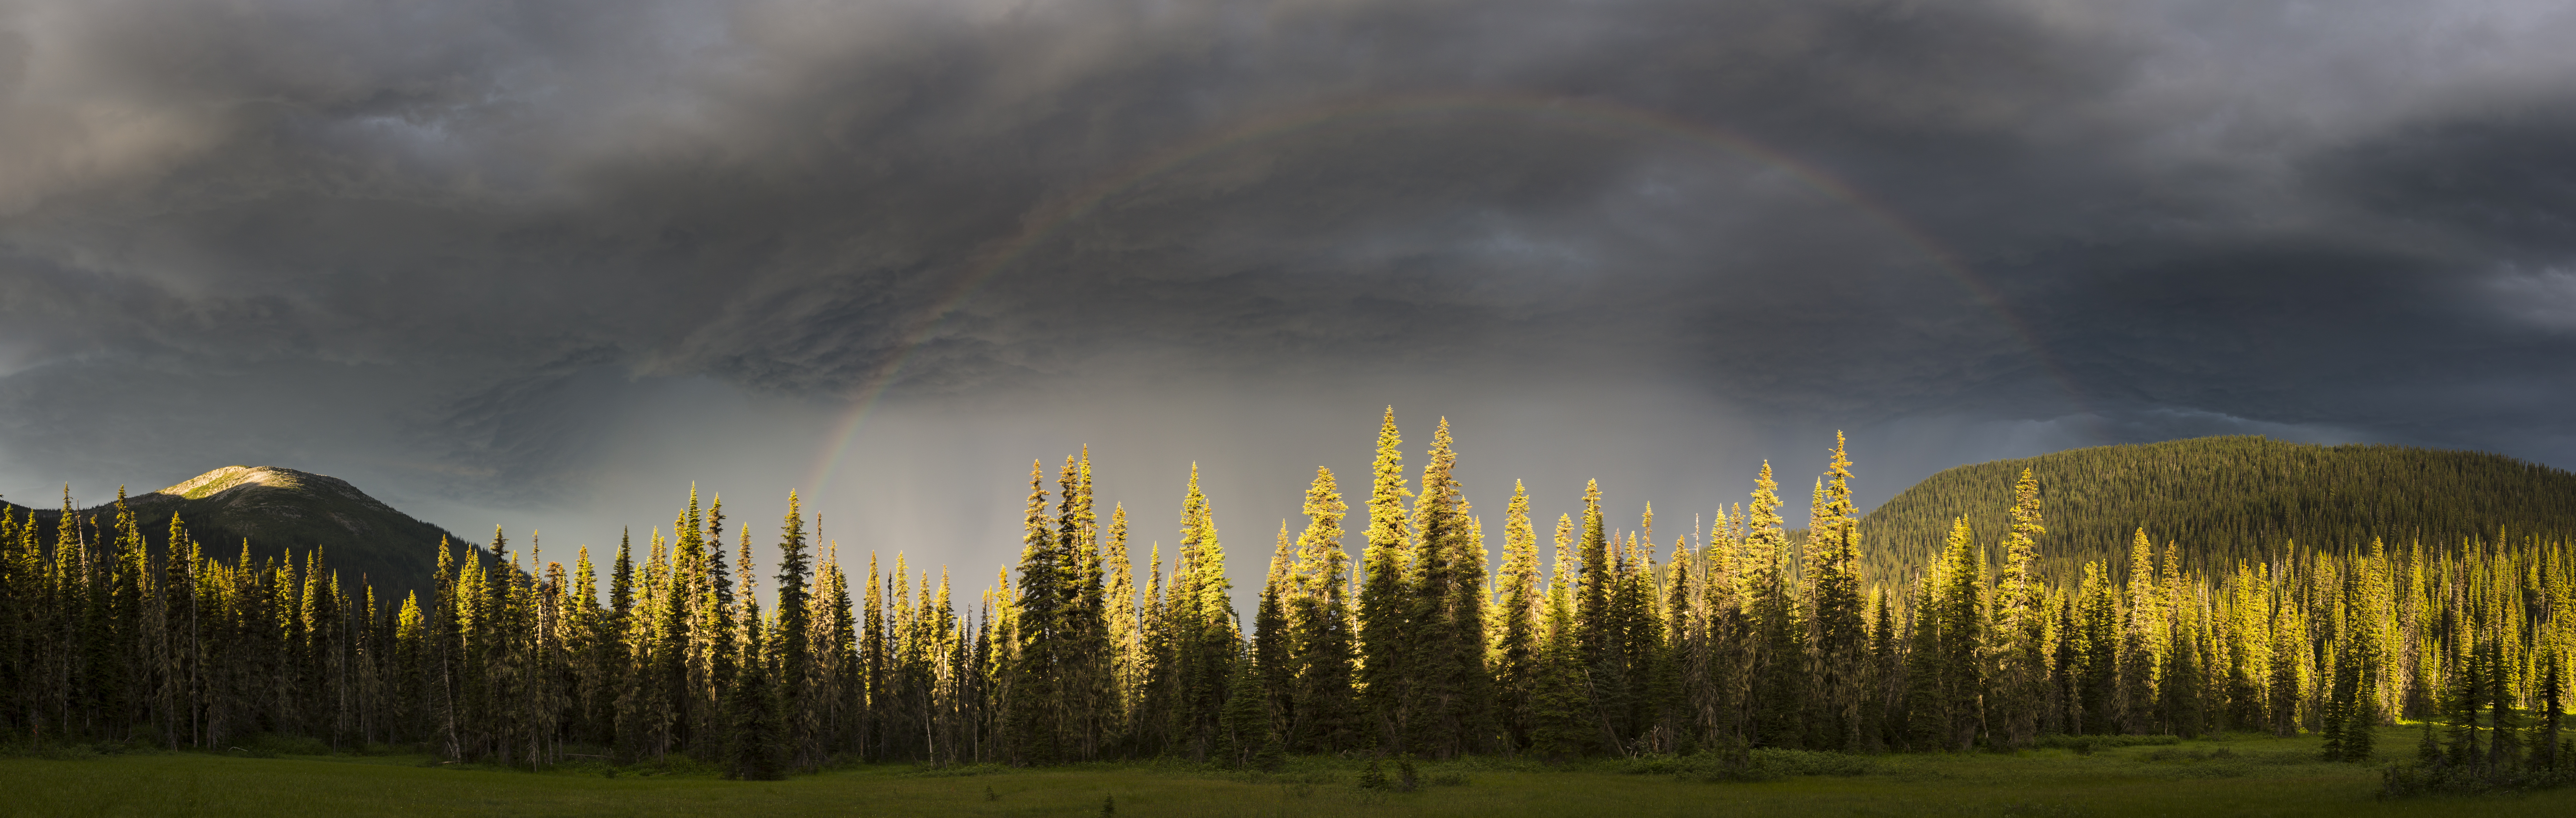 Thunder storm and rainbow in the Cariboo Mountains (David Moskowitz).